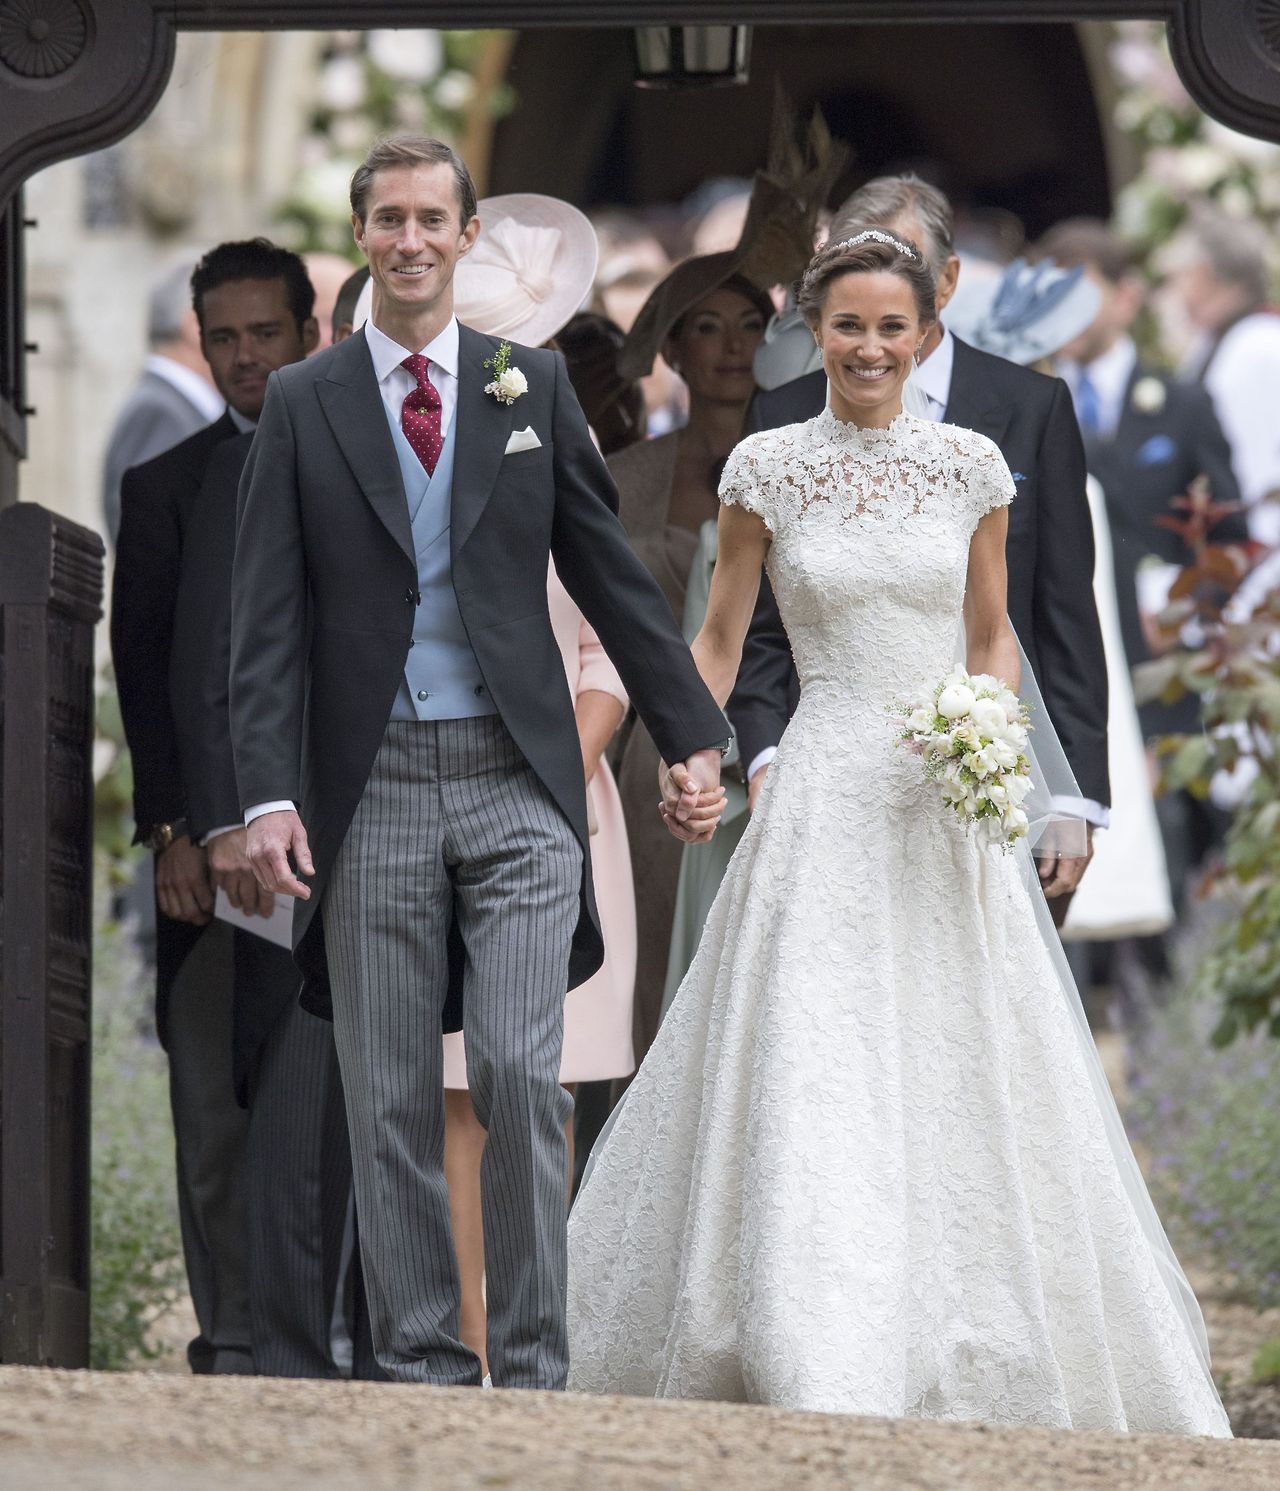 AN ECCENTRIC designer; a traditional dress. Pippa Middleton chose British couturier Giles Deacon to design her bridal gown for her wedding to James Matthews on Saturday, and the result was wonderfully Pinterest friendly: file this under “traditional...